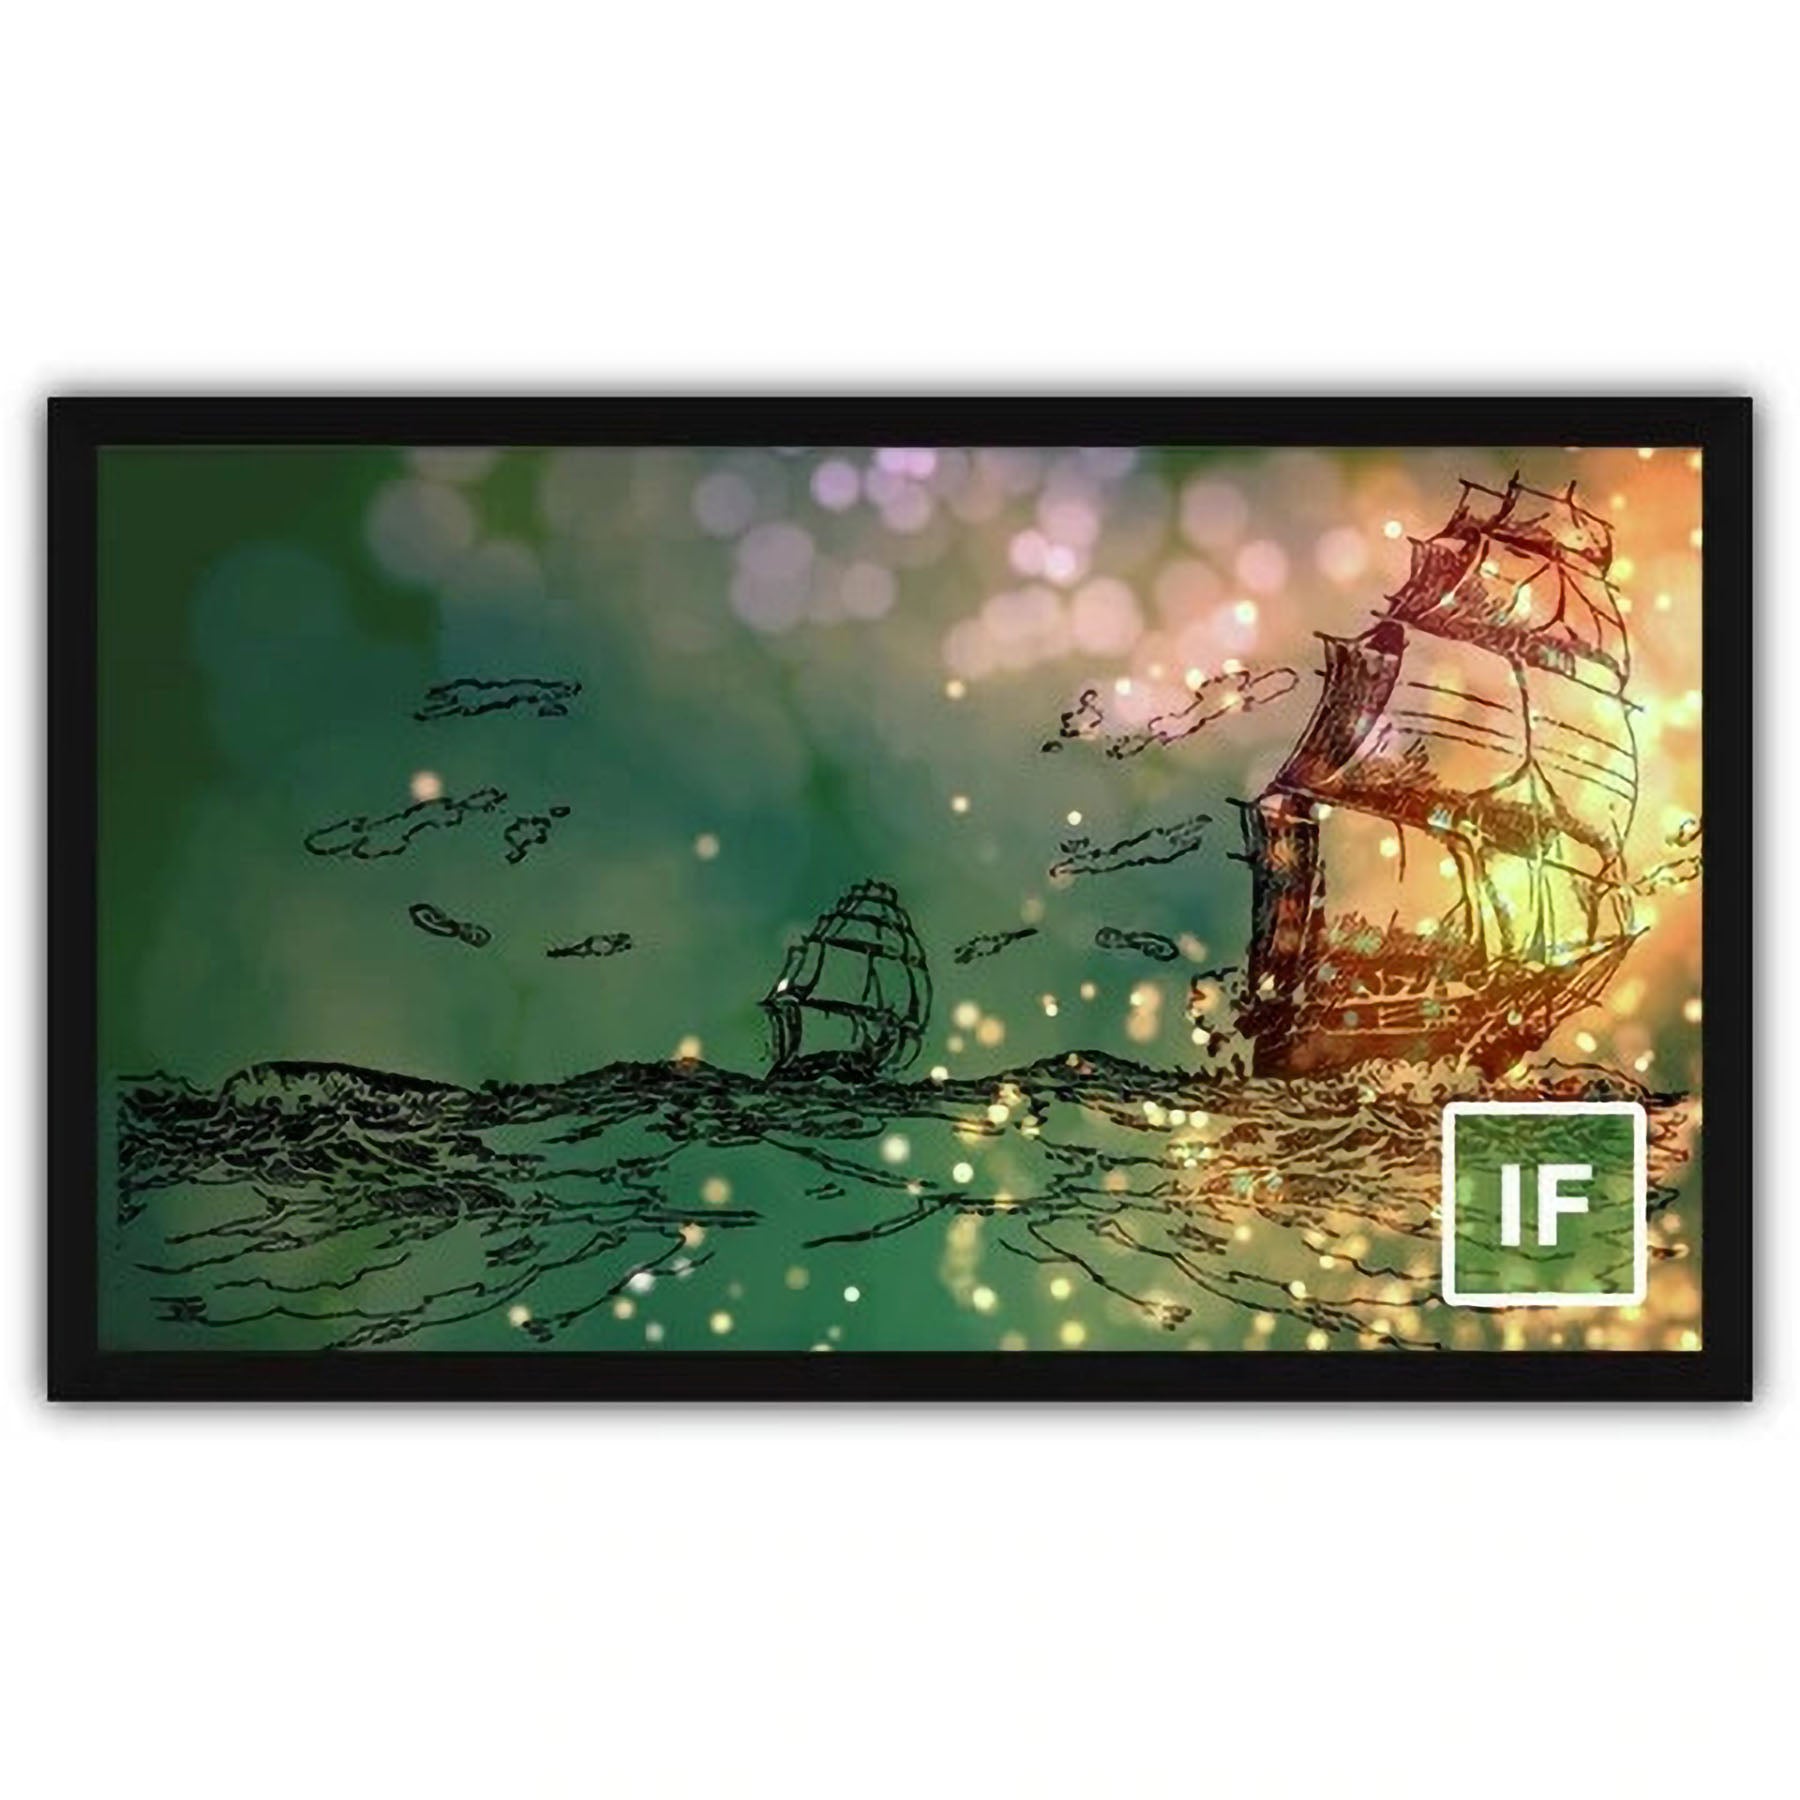 Severtson Screens Impression Series 2.35:1 113-inch Fixed Frame Projection Screen